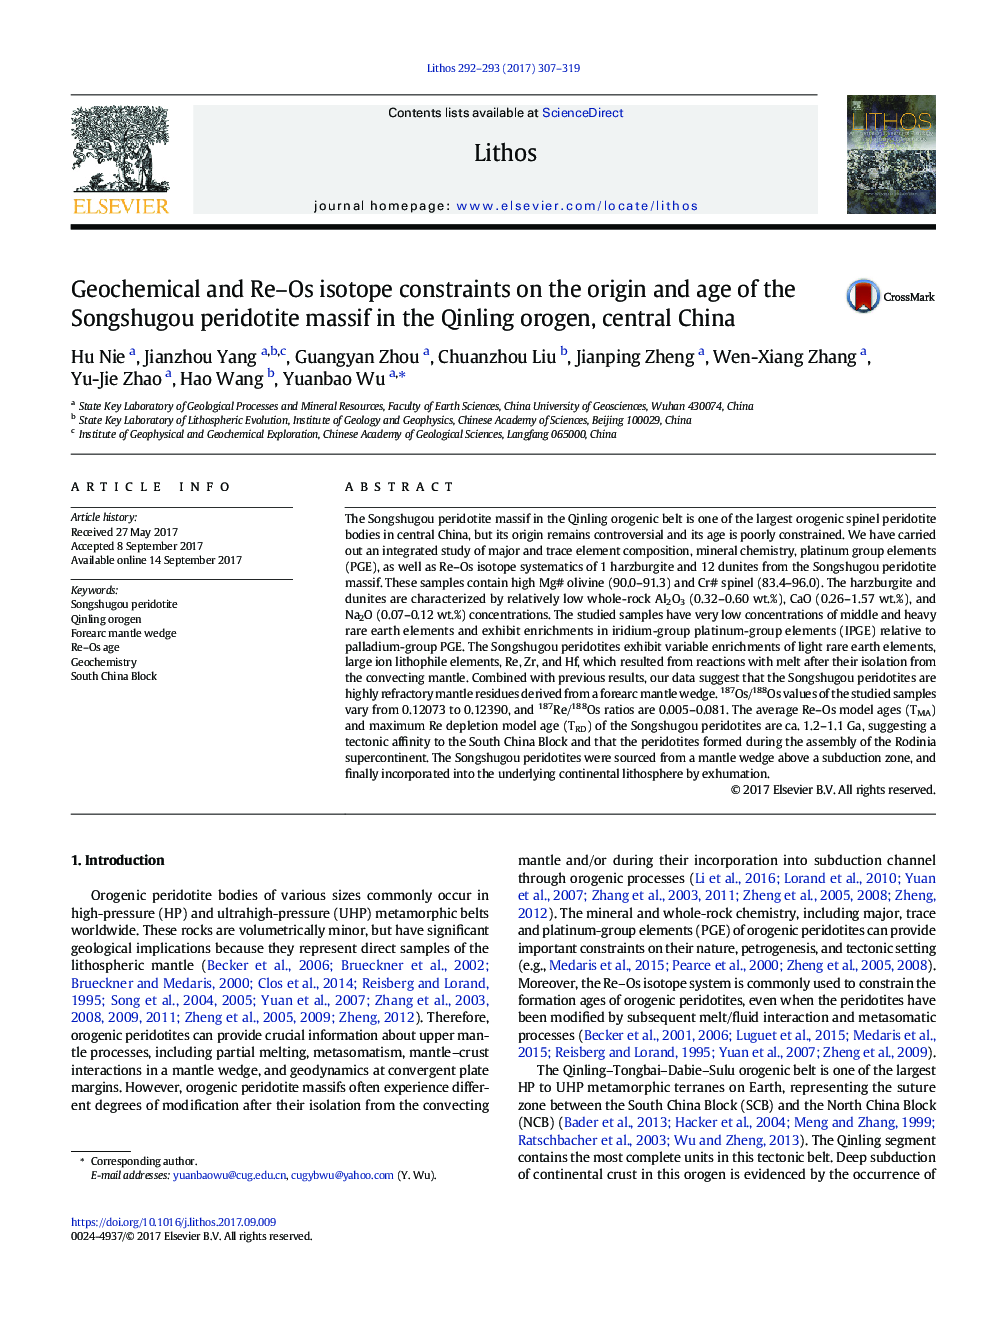 Geochemical and Re-Os isotope constraints on the origin and age of the Songshugou peridotite massif in the Qinling orogen, central China